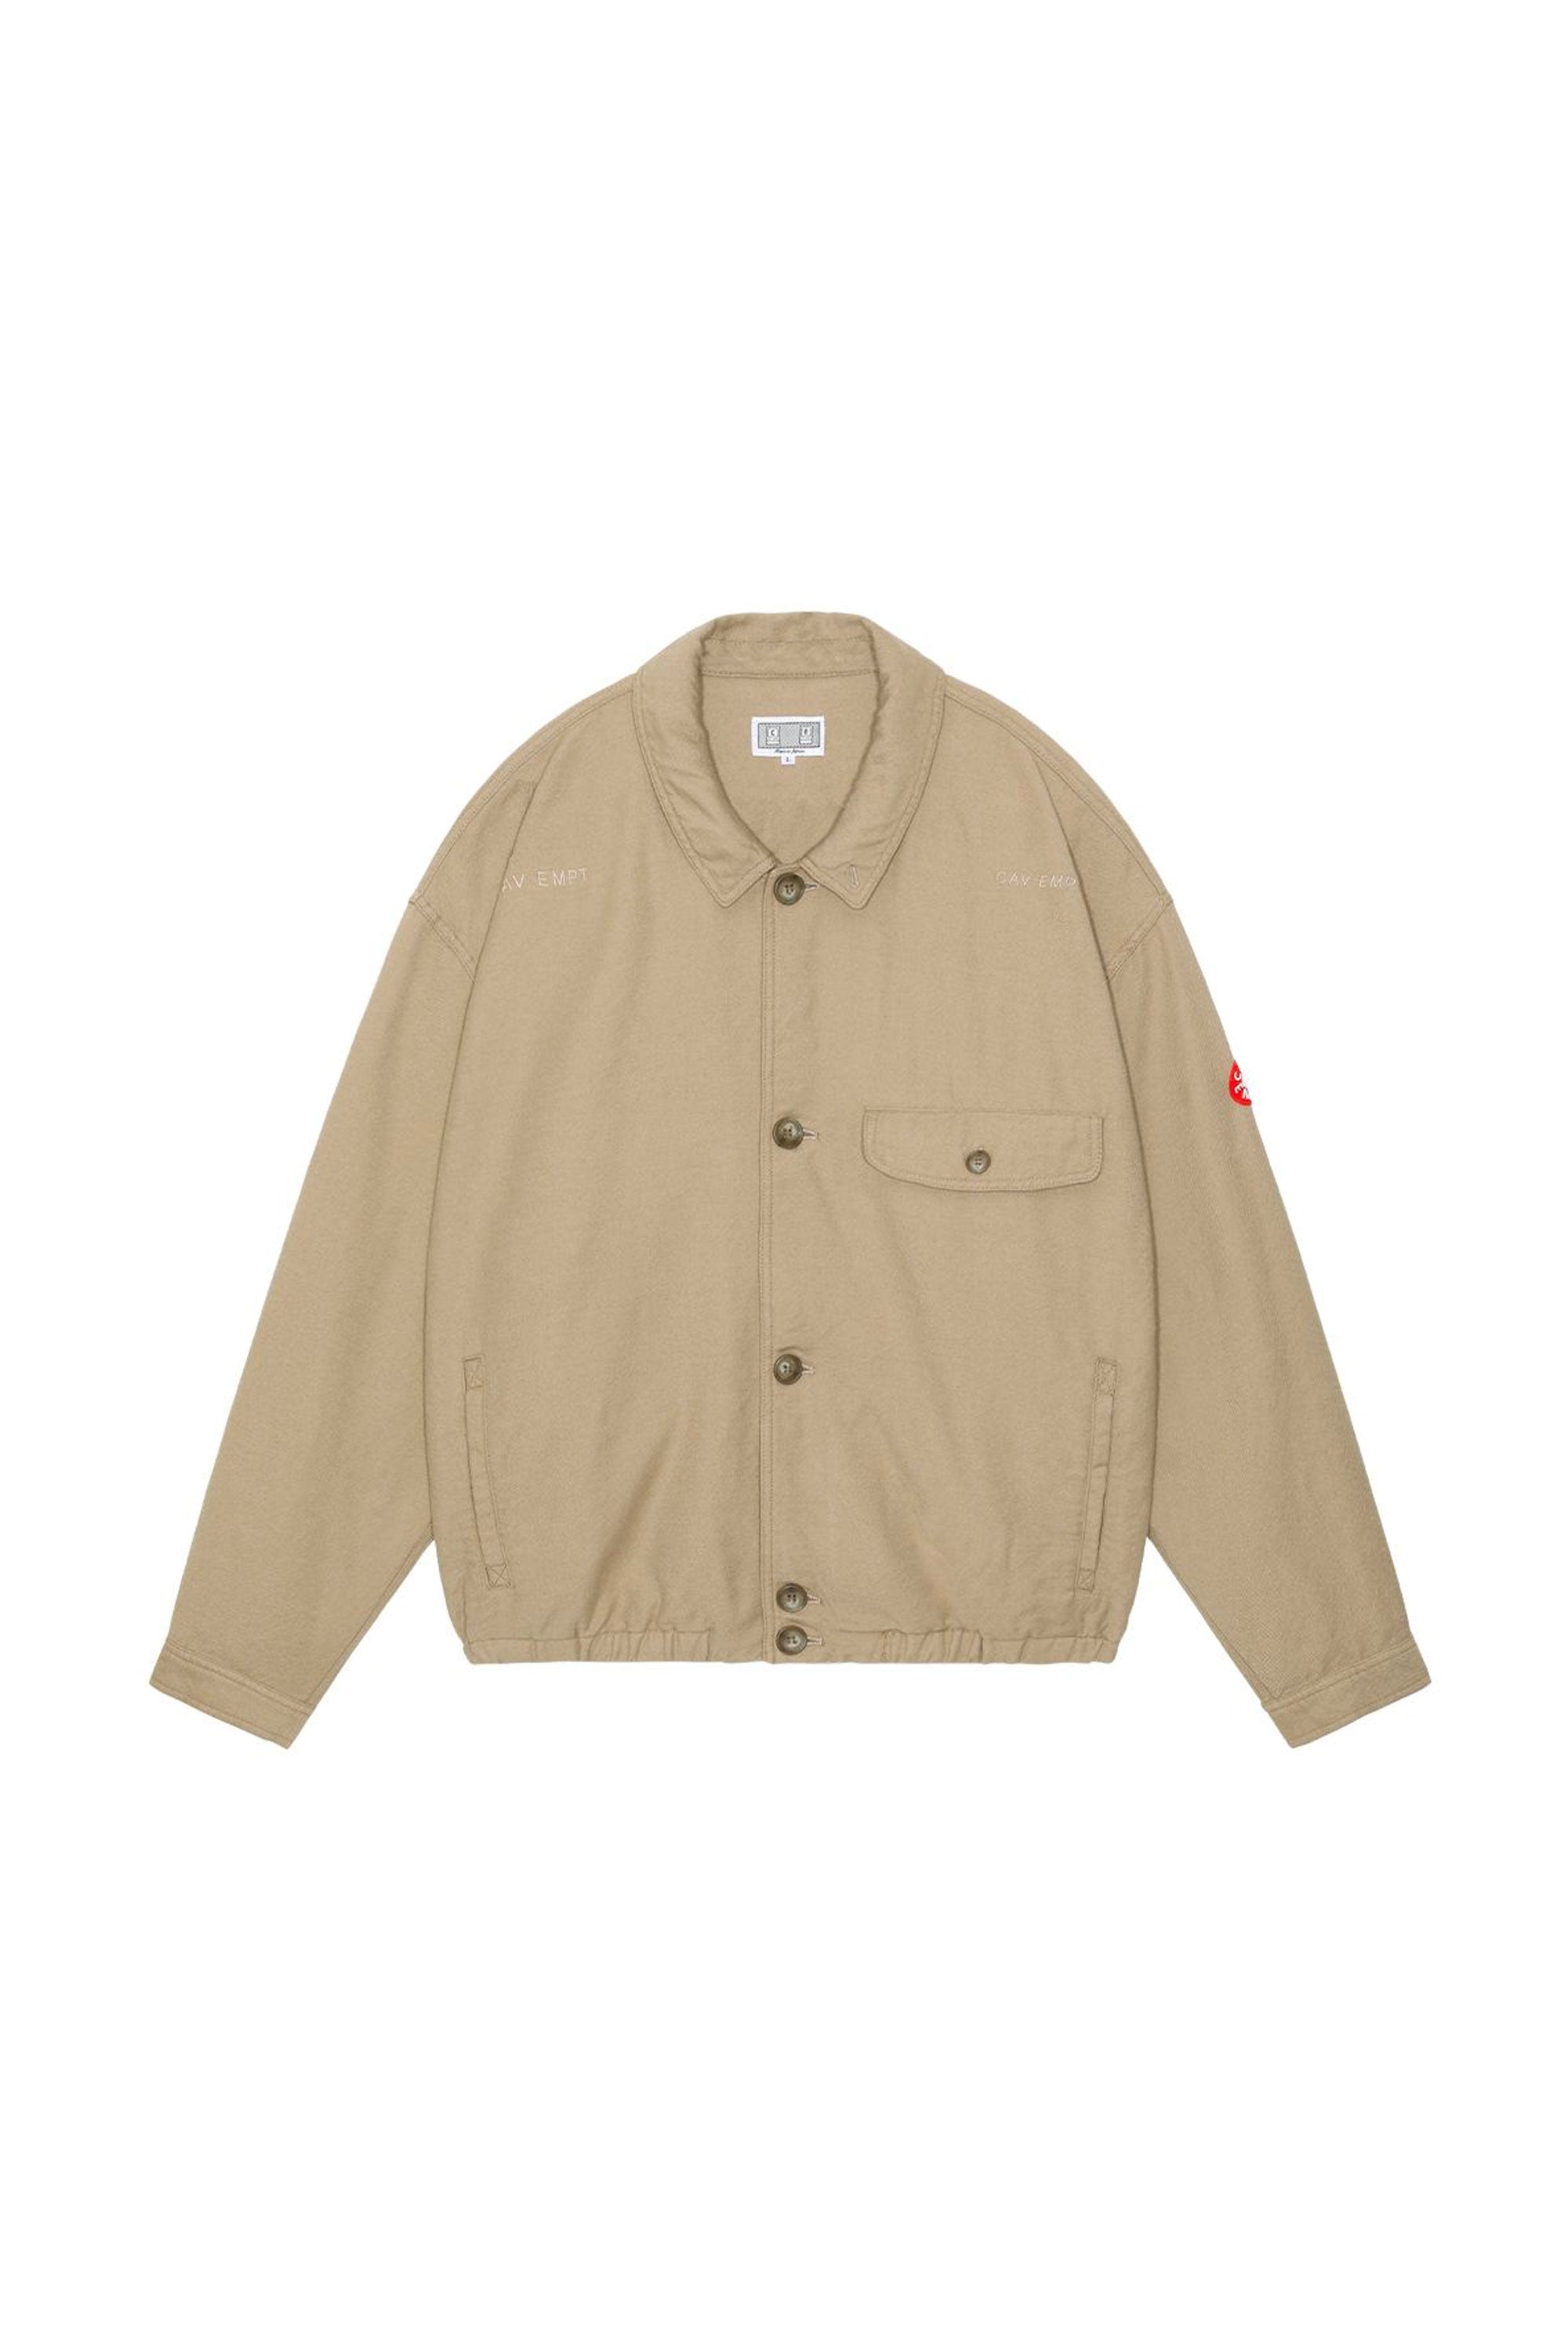 The CAV EMPT - CW BUTTON UP JACKET  available online with global shipping, and in PAM Stores Melbourne and Sydney.